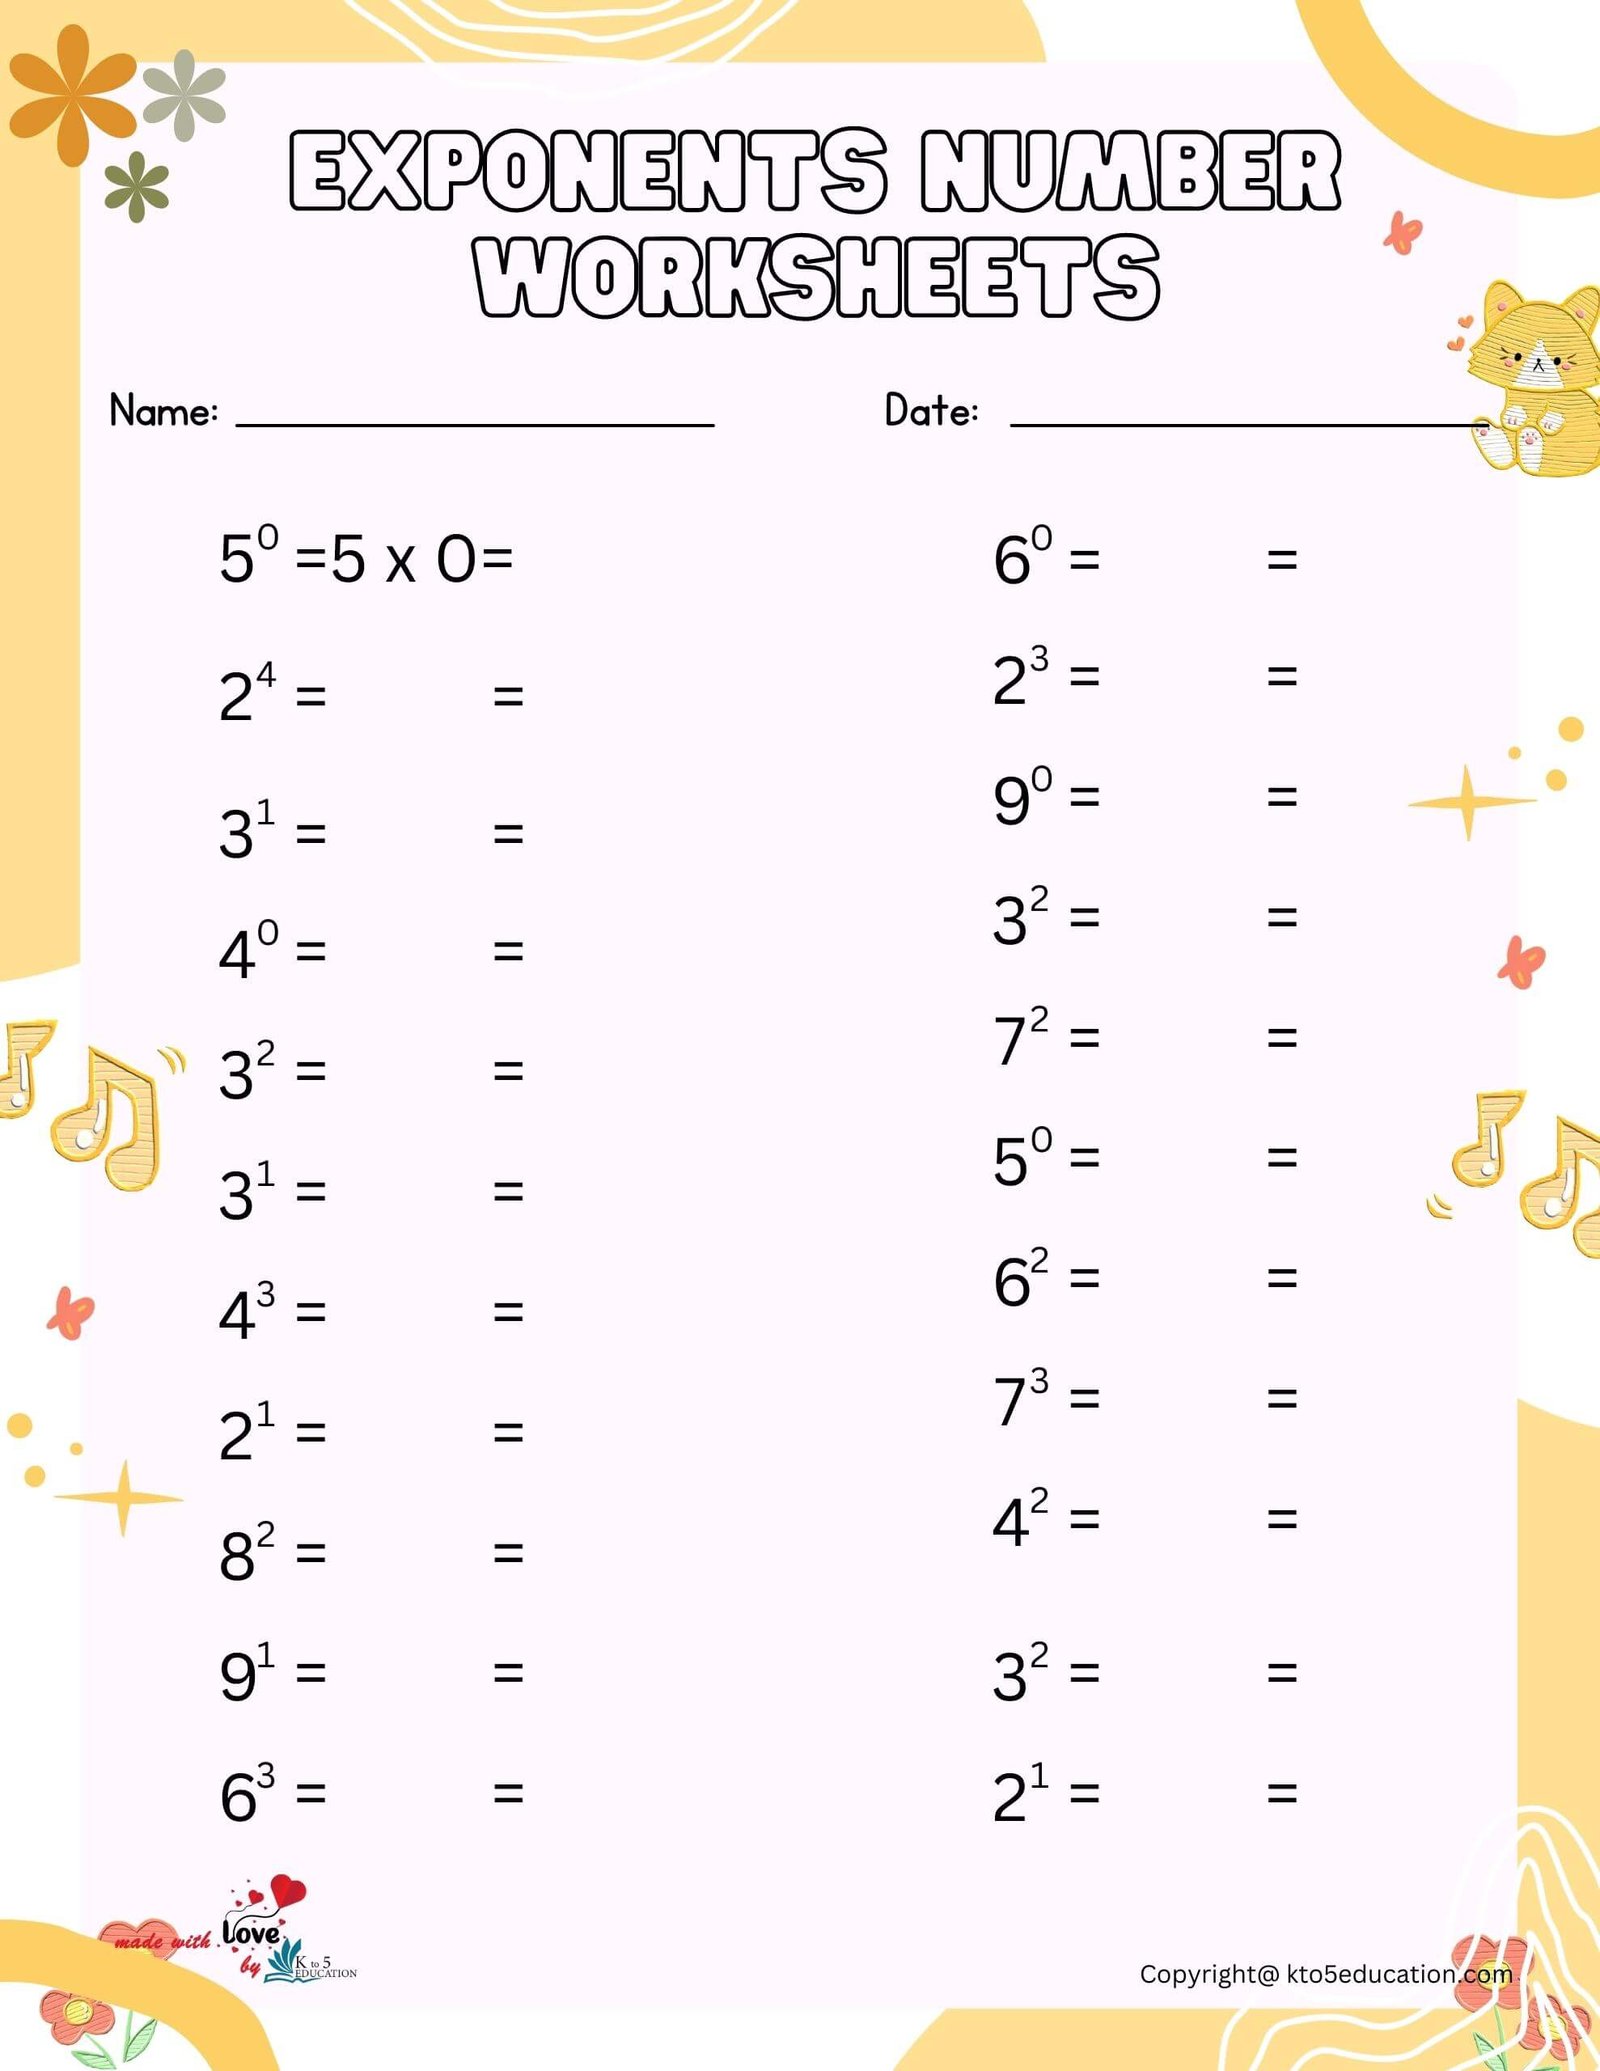 Simple Free Printable Exponents Worksheet For st Grade